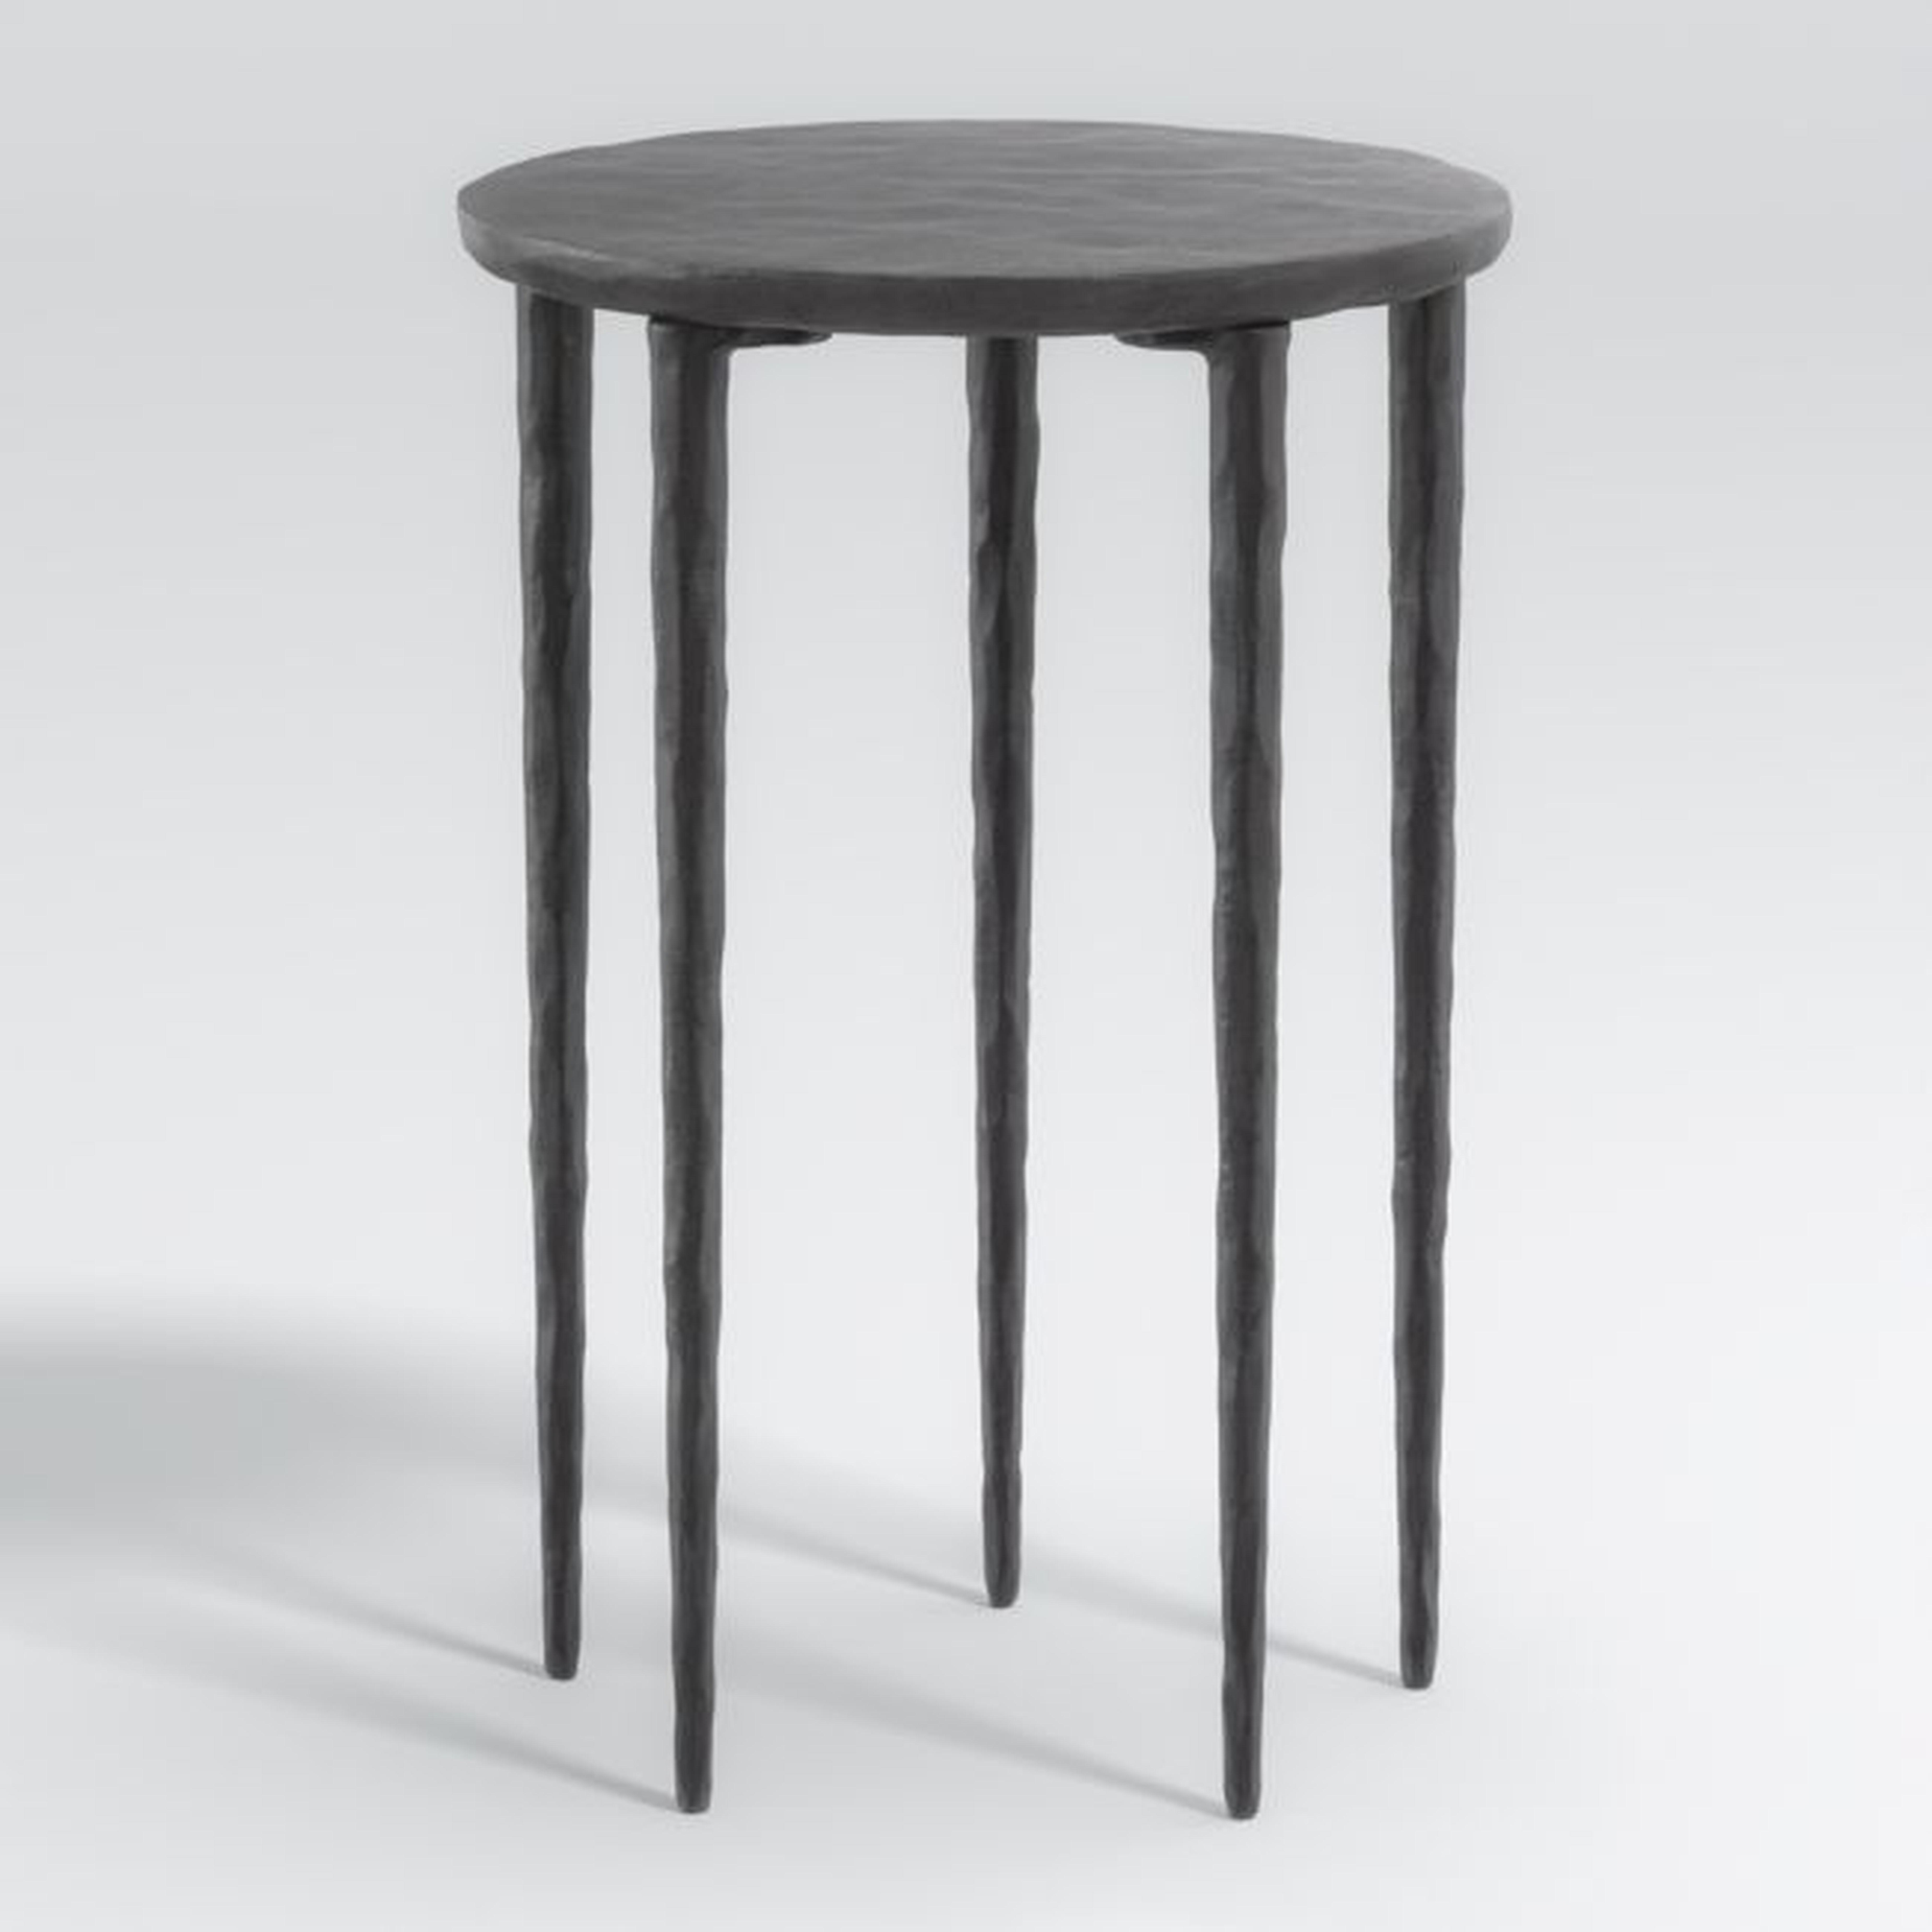 Staal Cast Aluminum Round End Table - Crate and Barrel